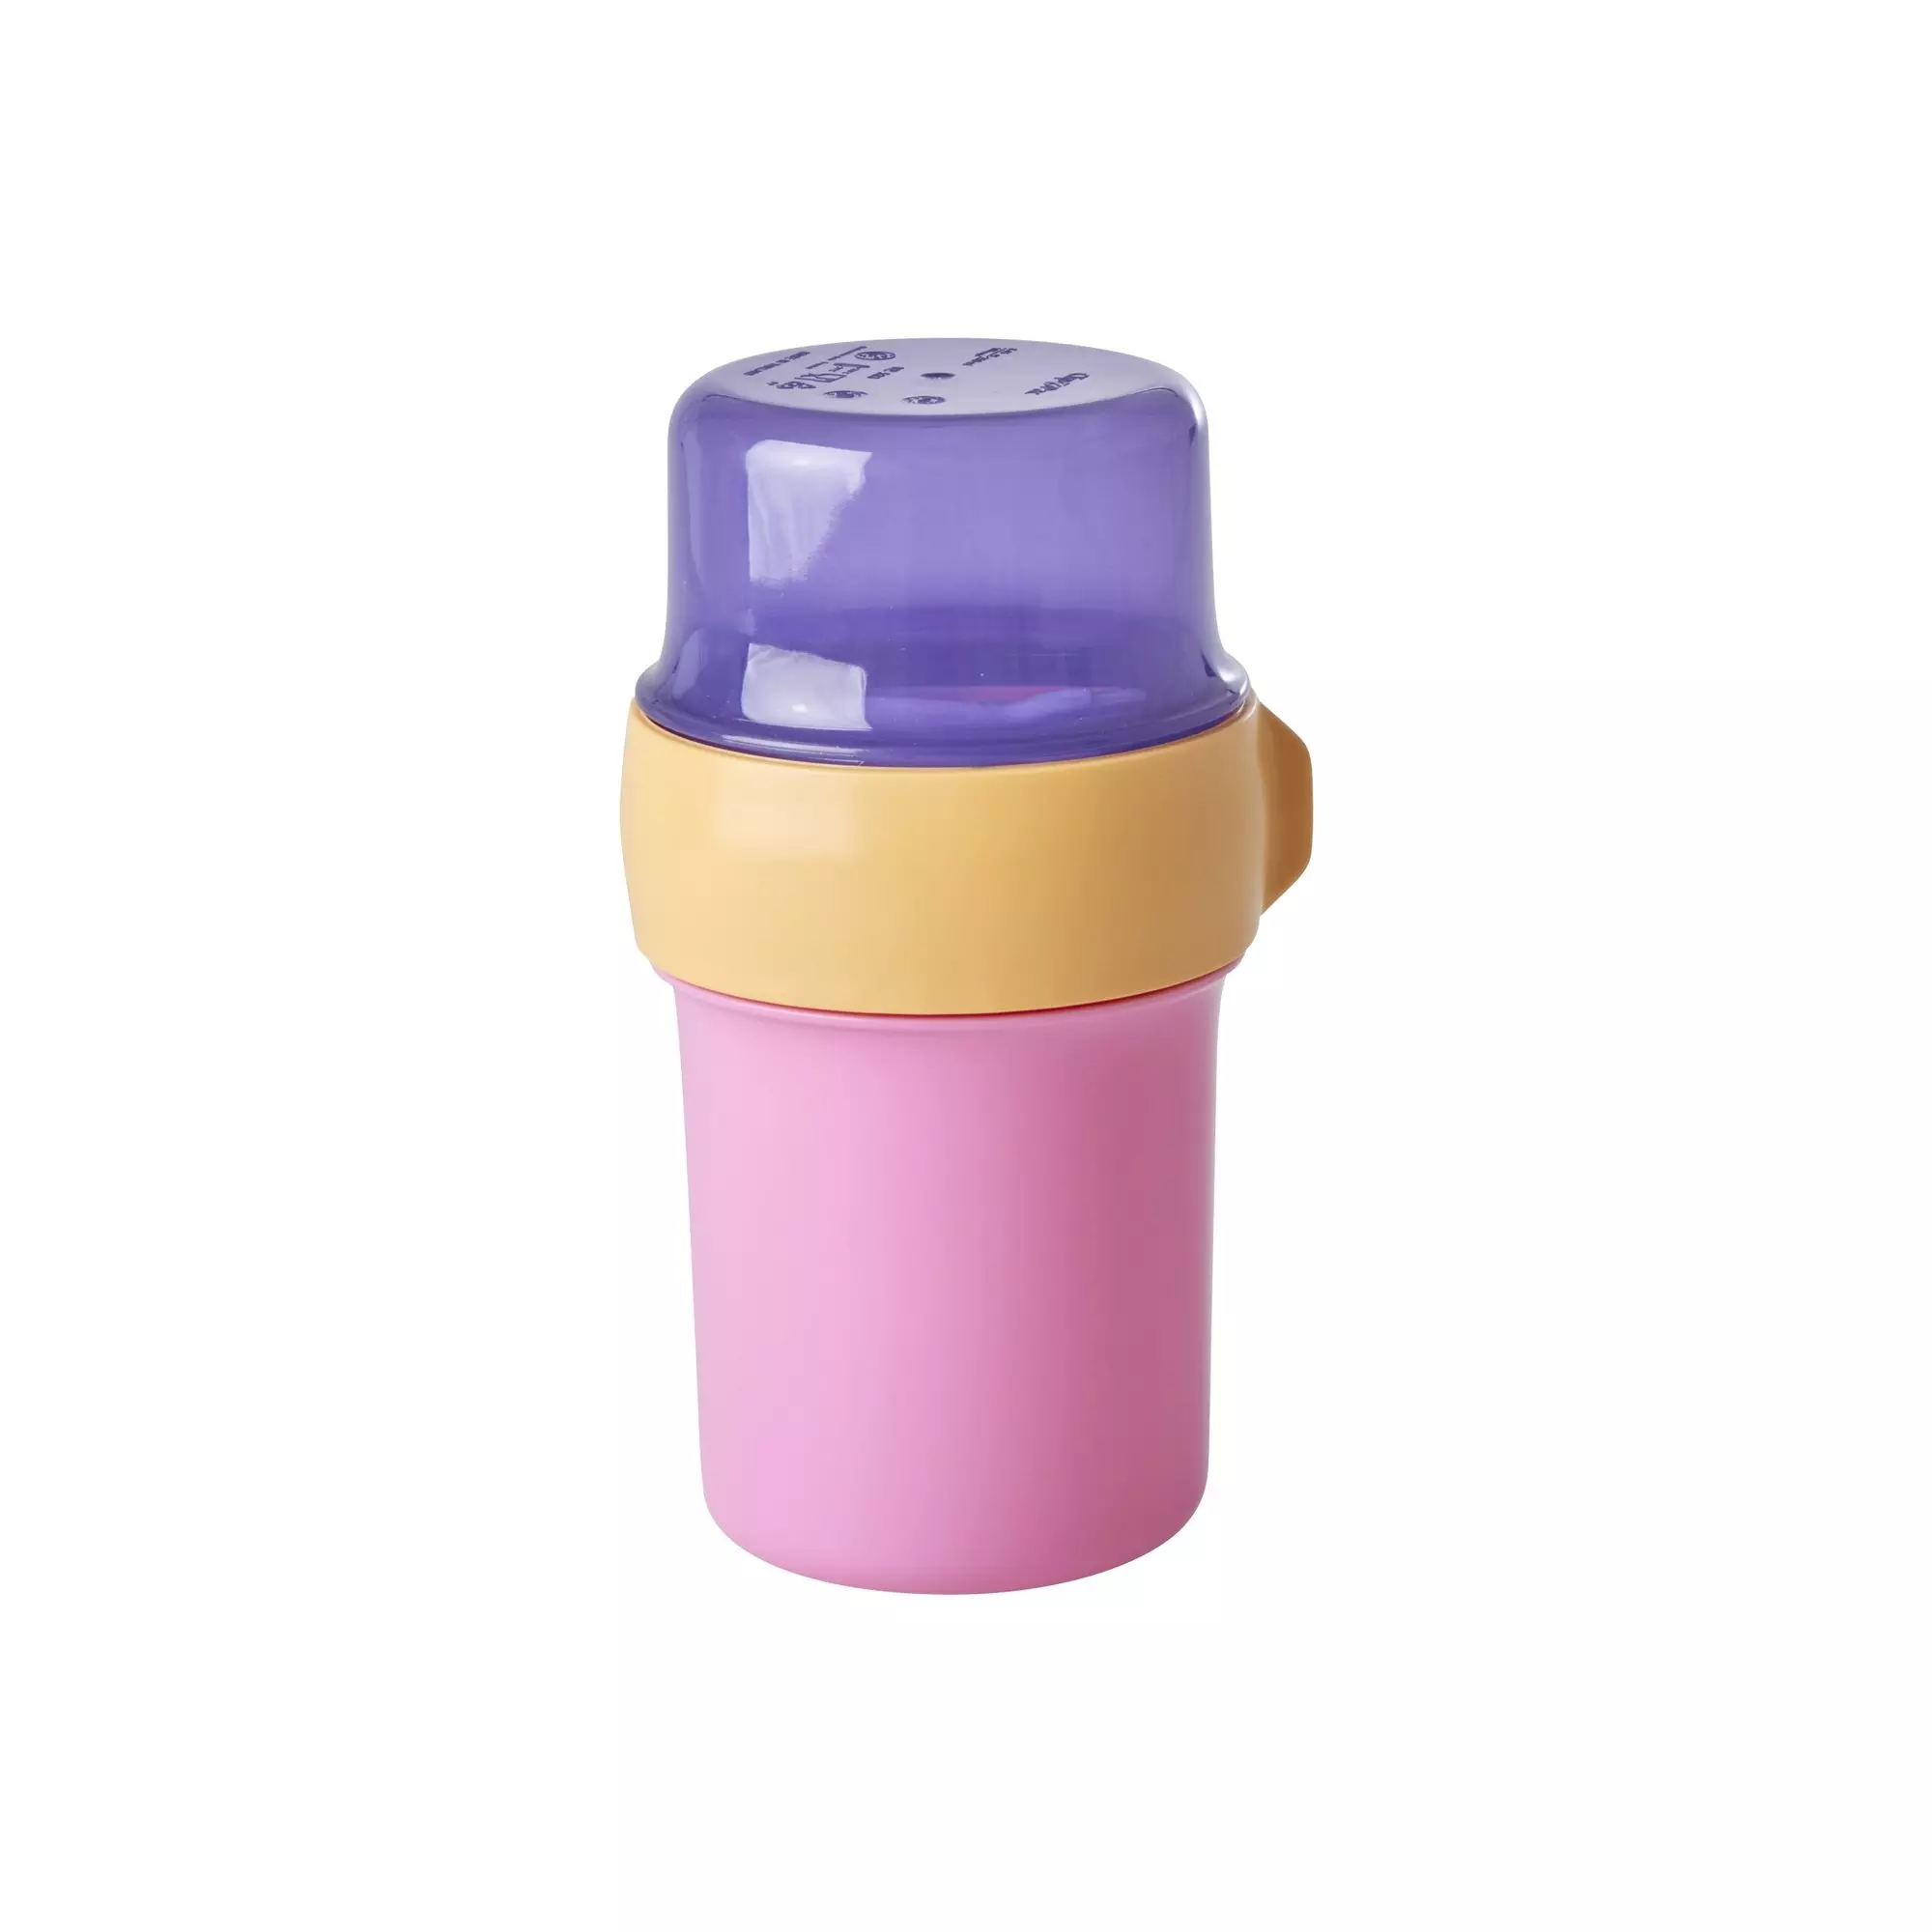 Rice Granola Container Ml-Lid Soft Pink